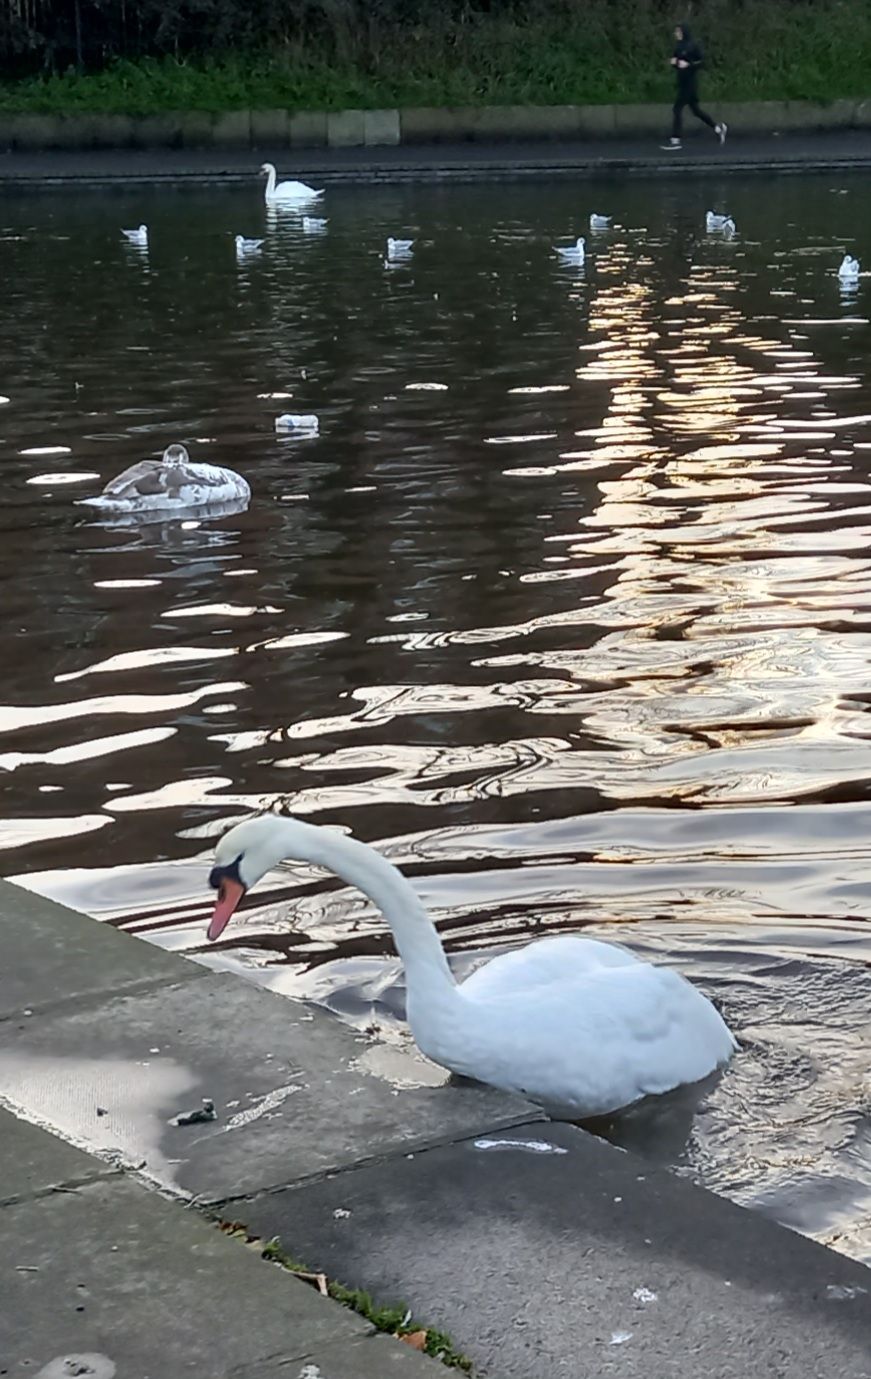 HEARTBREAKING: A bird flu-stricken swan is close to death and vainly trying to scramble out of the water; the popular North Belfast park is home to large flocks of swans, geese and ducks